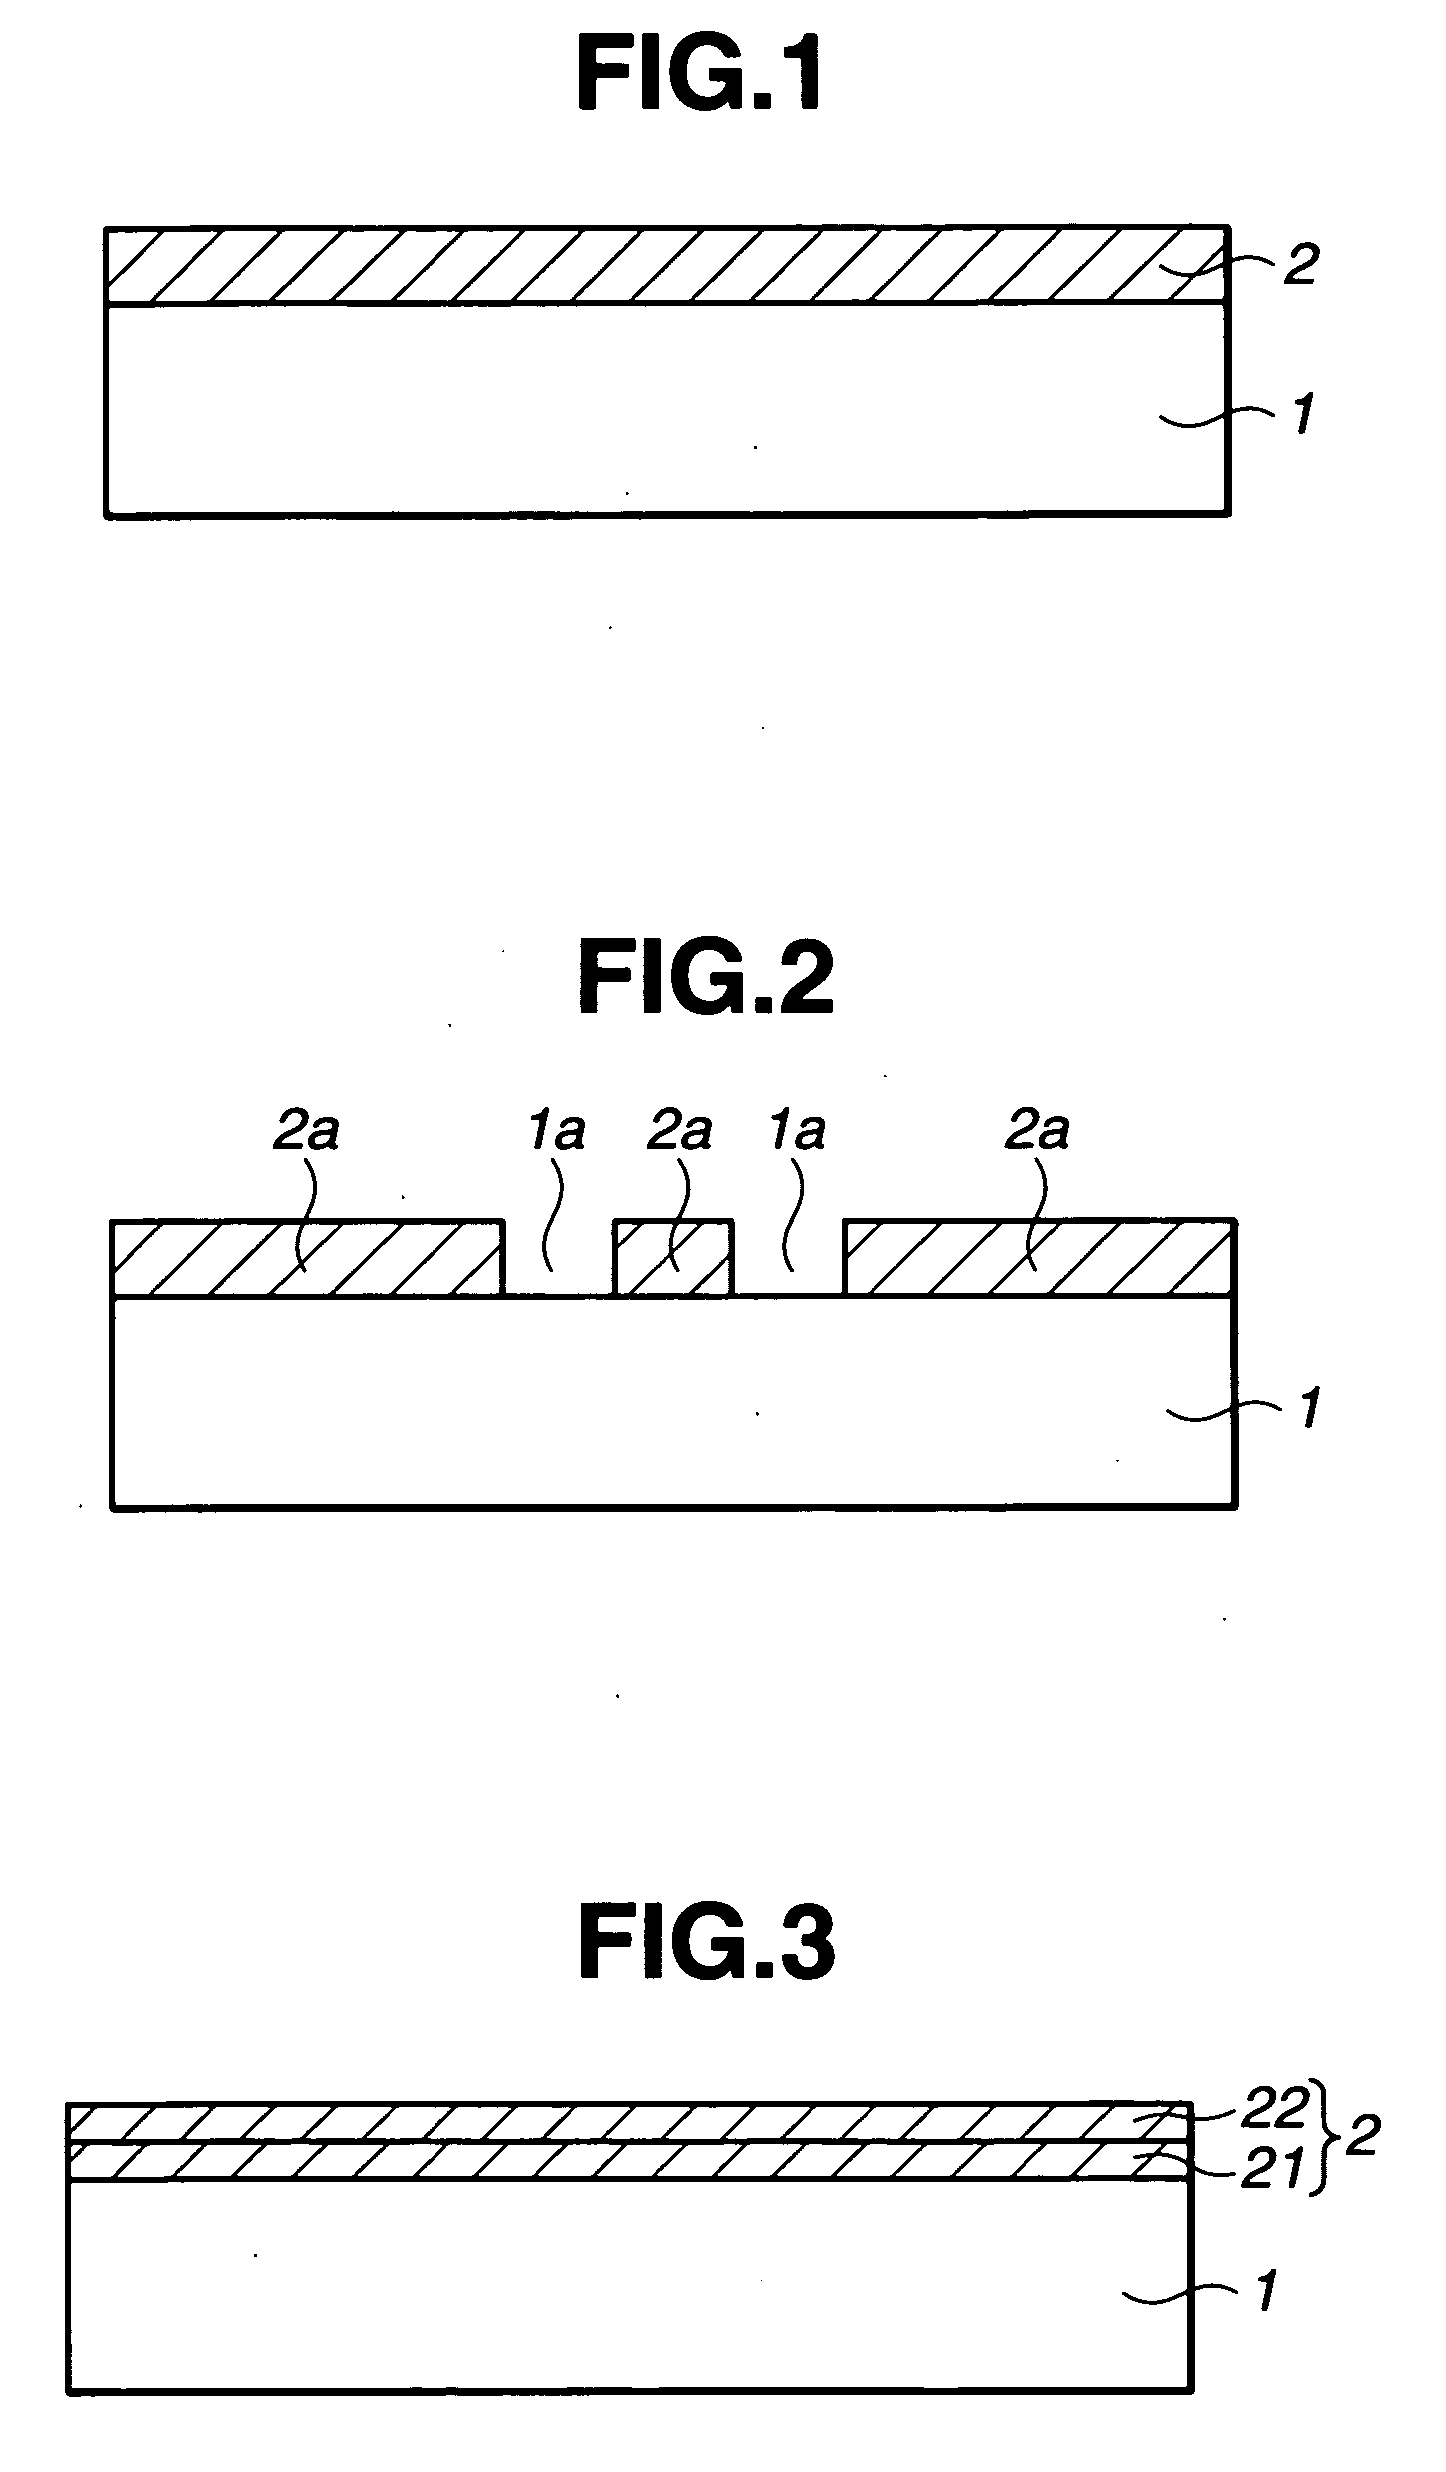 Photomask blank, photomask, and method of manufacture